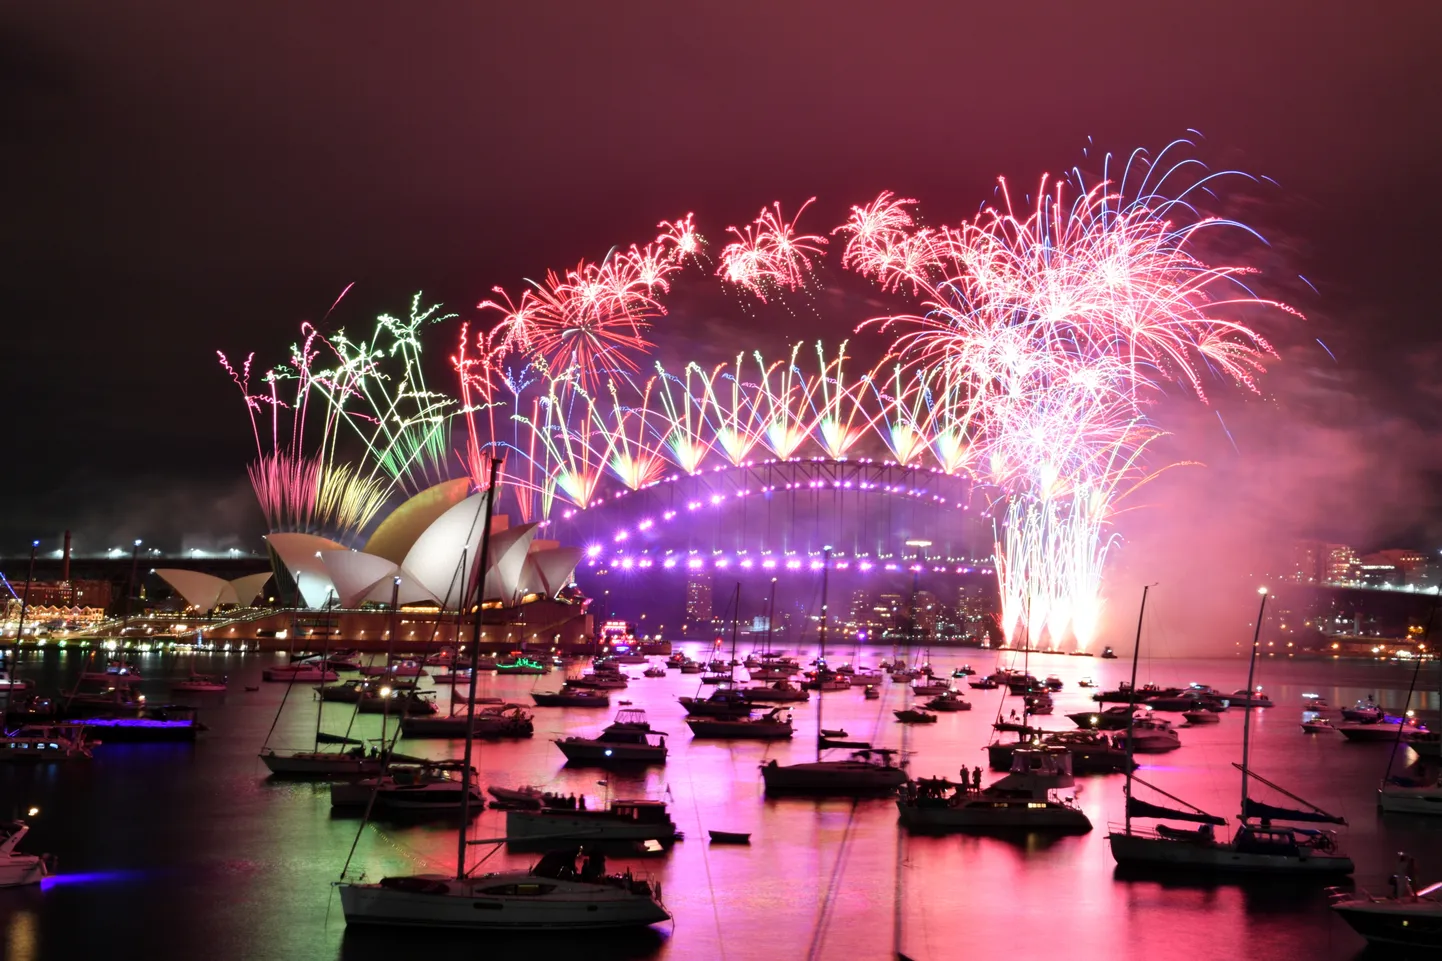 Fireworks explode over the Sydney Opera House and Sydney Harbour Bridge during downsized New Year's Eve celebrations due during the COVID-19 pandemic, in Australia, January 1, 2021. AAP Image for NSW Government/Mick Tsikas/Handout via REUTERS NO RESALES. NO ARCHIVES. THIS IMAGE HAS BEEN PROVIDED BY A THIRD PARTY